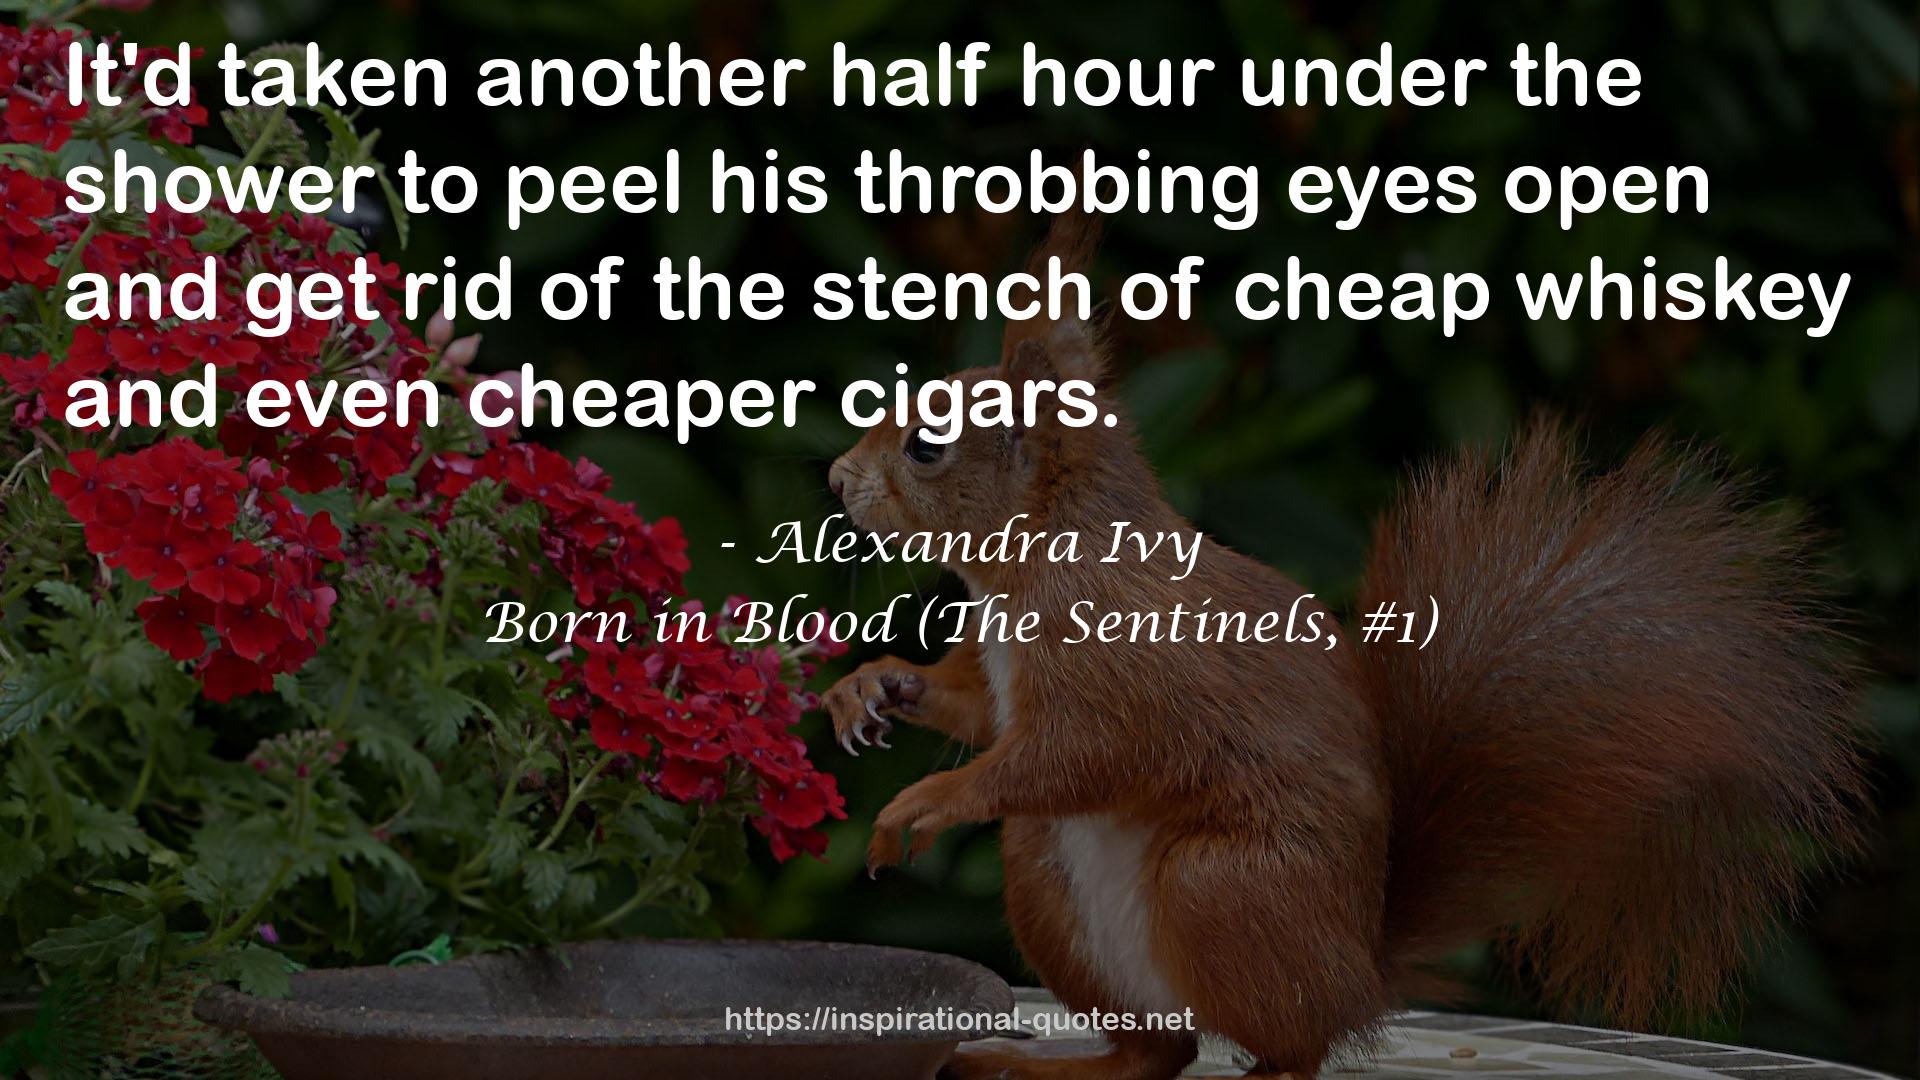 Born in Blood (The Sentinels, #1) QUOTES